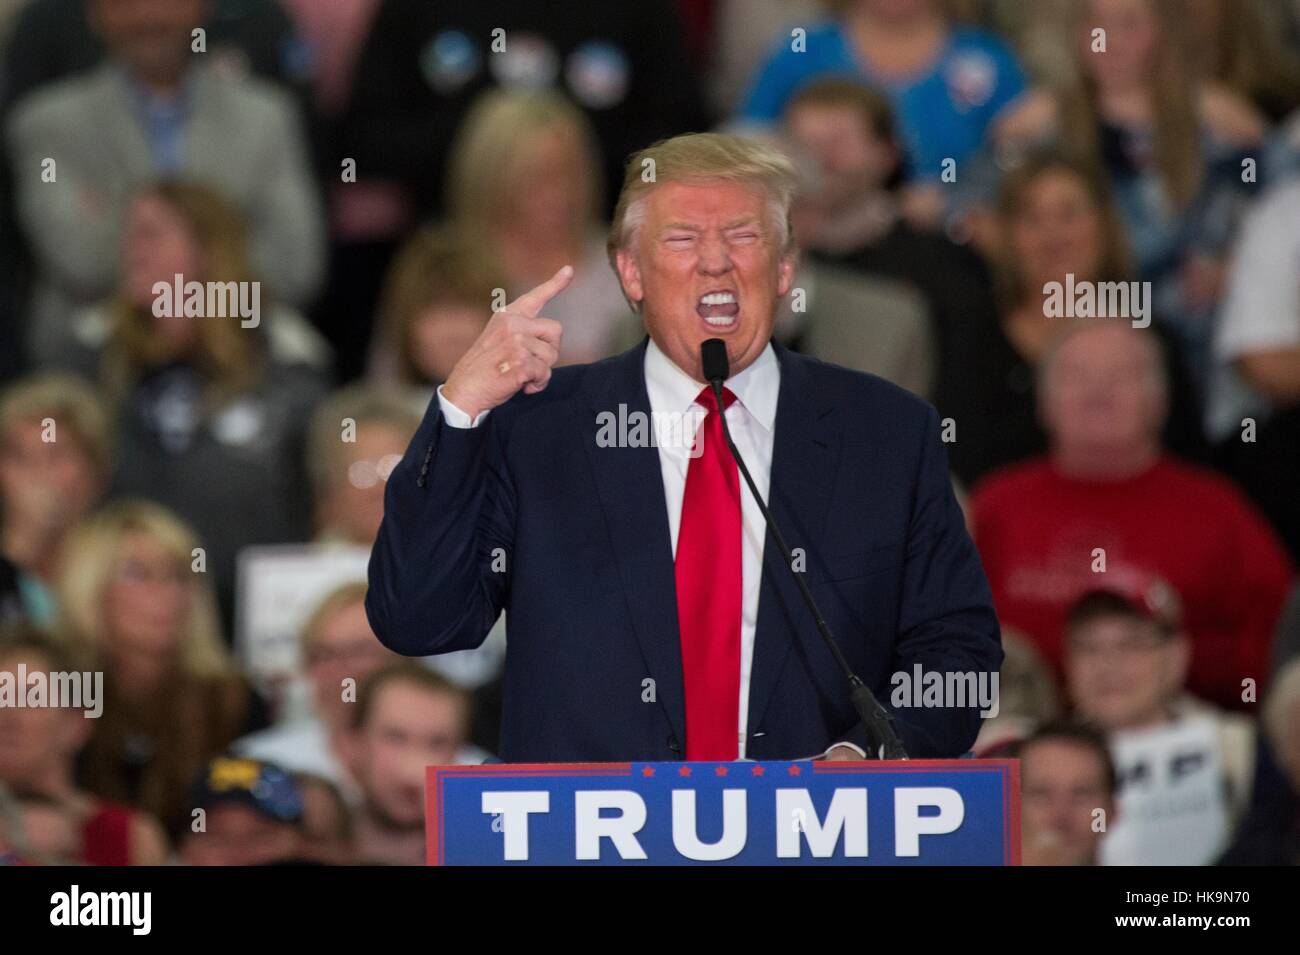 Republican presidential candidate billionaire Donald Trump mocks disabled New York Times reporter Serge Kovaleski during a campaign rally at the Myrtle Beach Convention Center November 24, 2015 in Myrtle Beach, South Carolina. Stock Photo